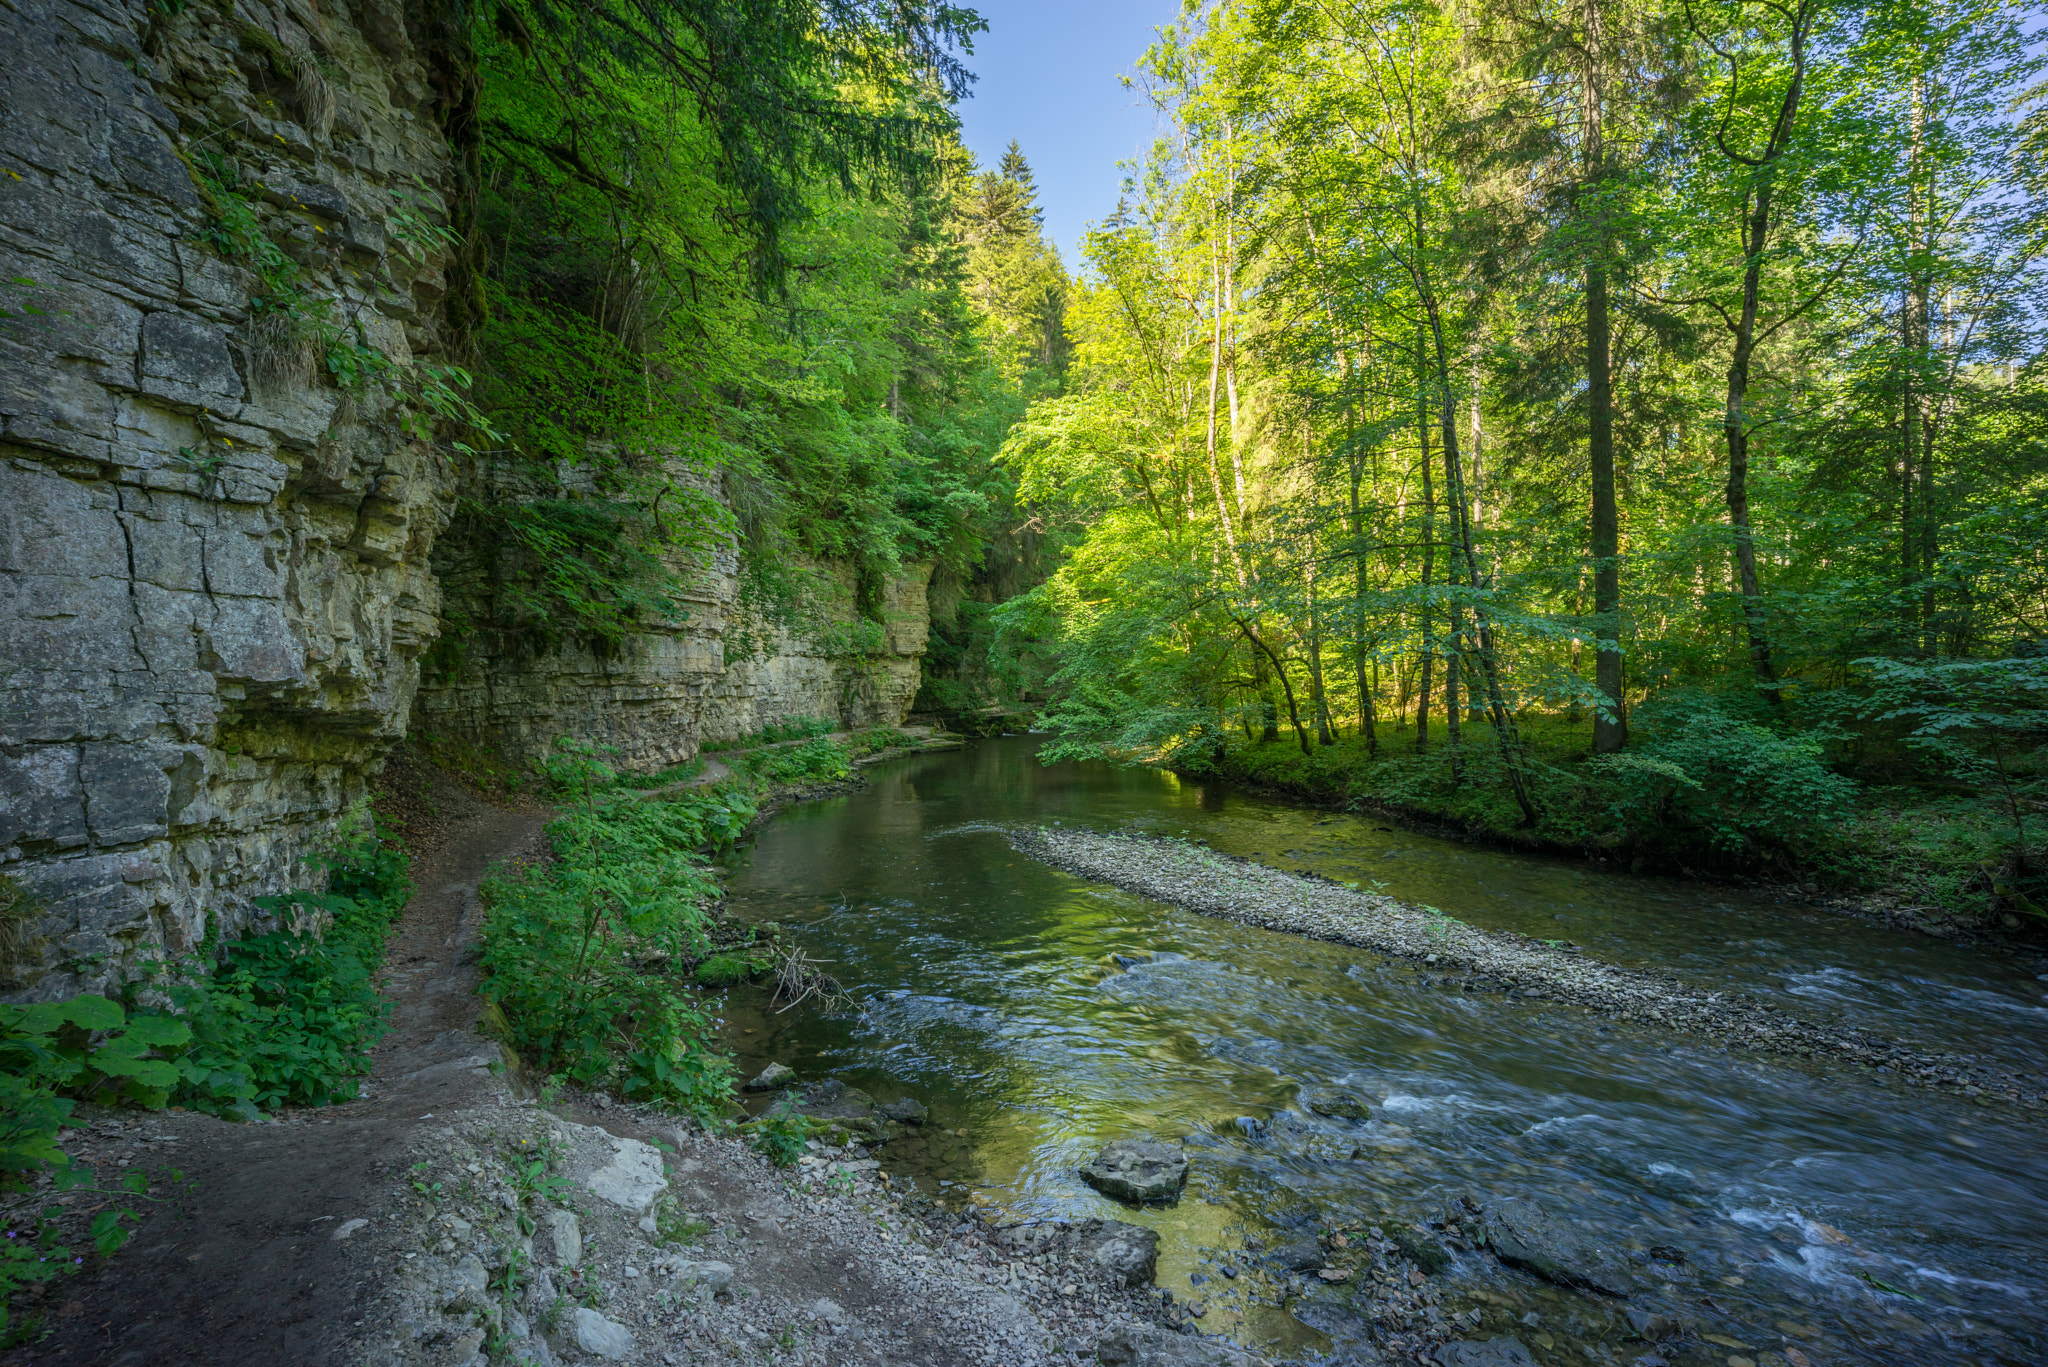 Sony a7R sample photo. The wutach valley photography